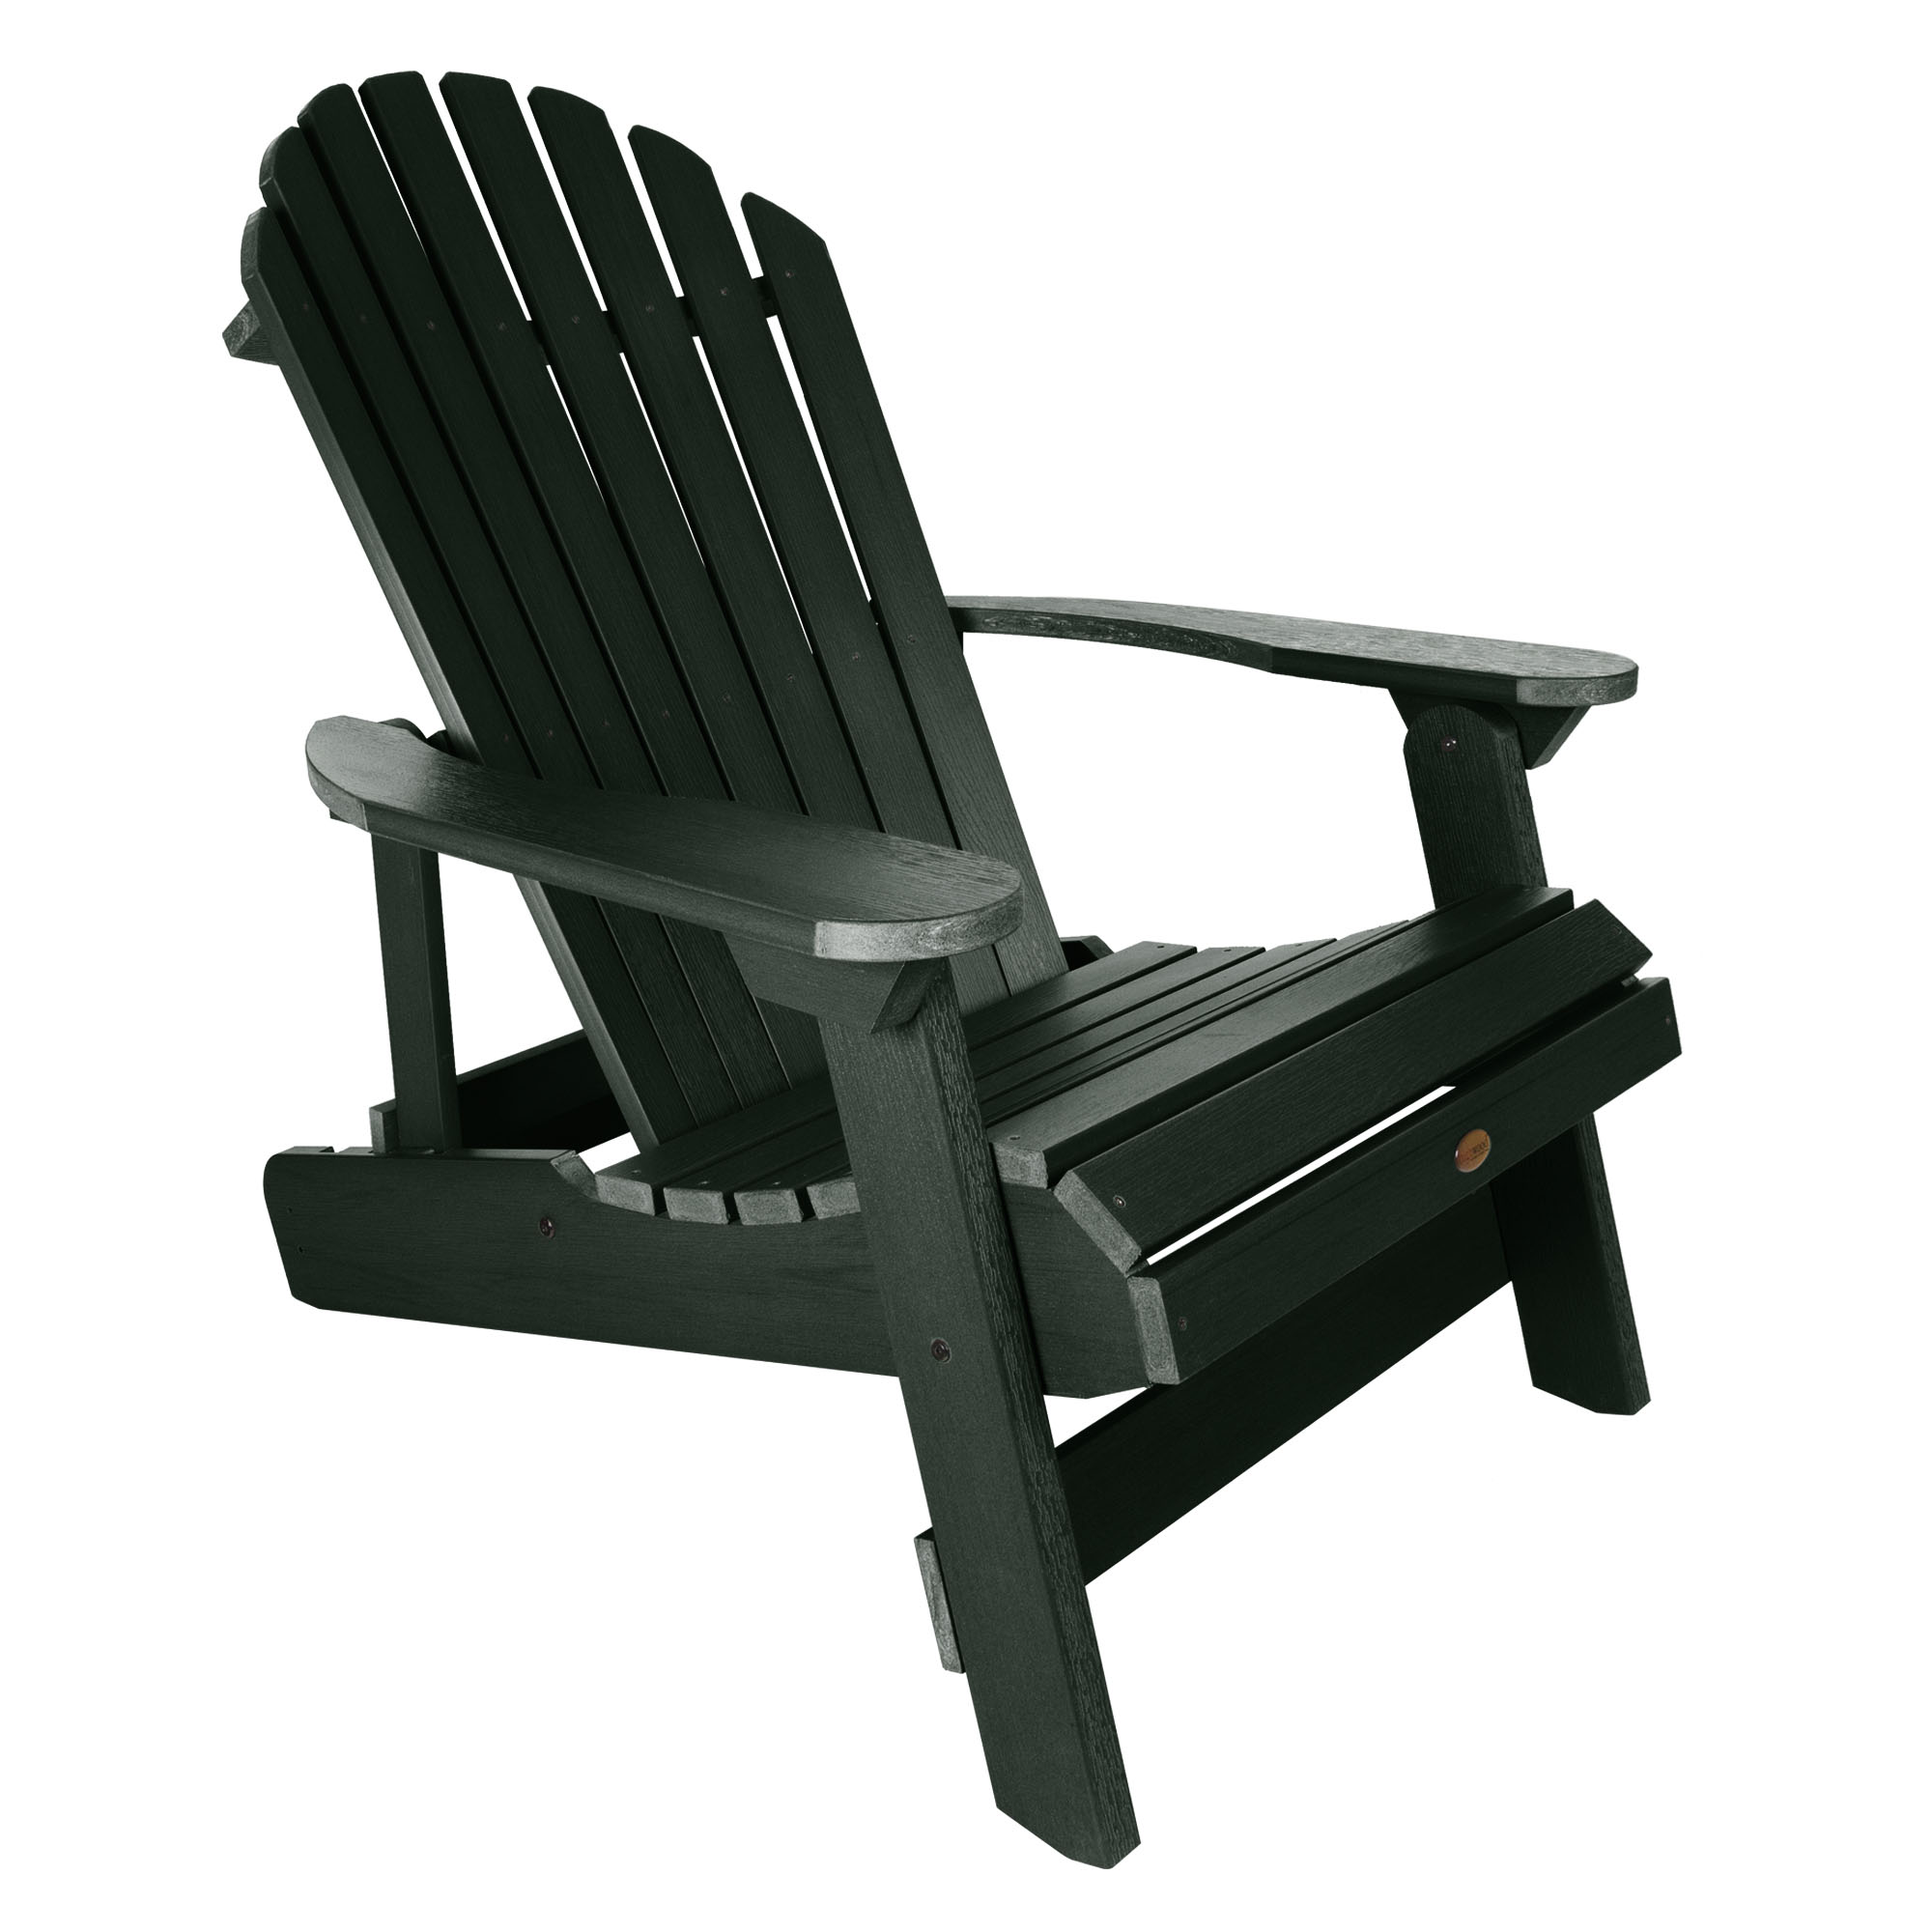 1 King Hamilton Folding & Reclining Adirondack Chair with 1 Folding Ottoman and 1 Cupholder - image 2 of 6